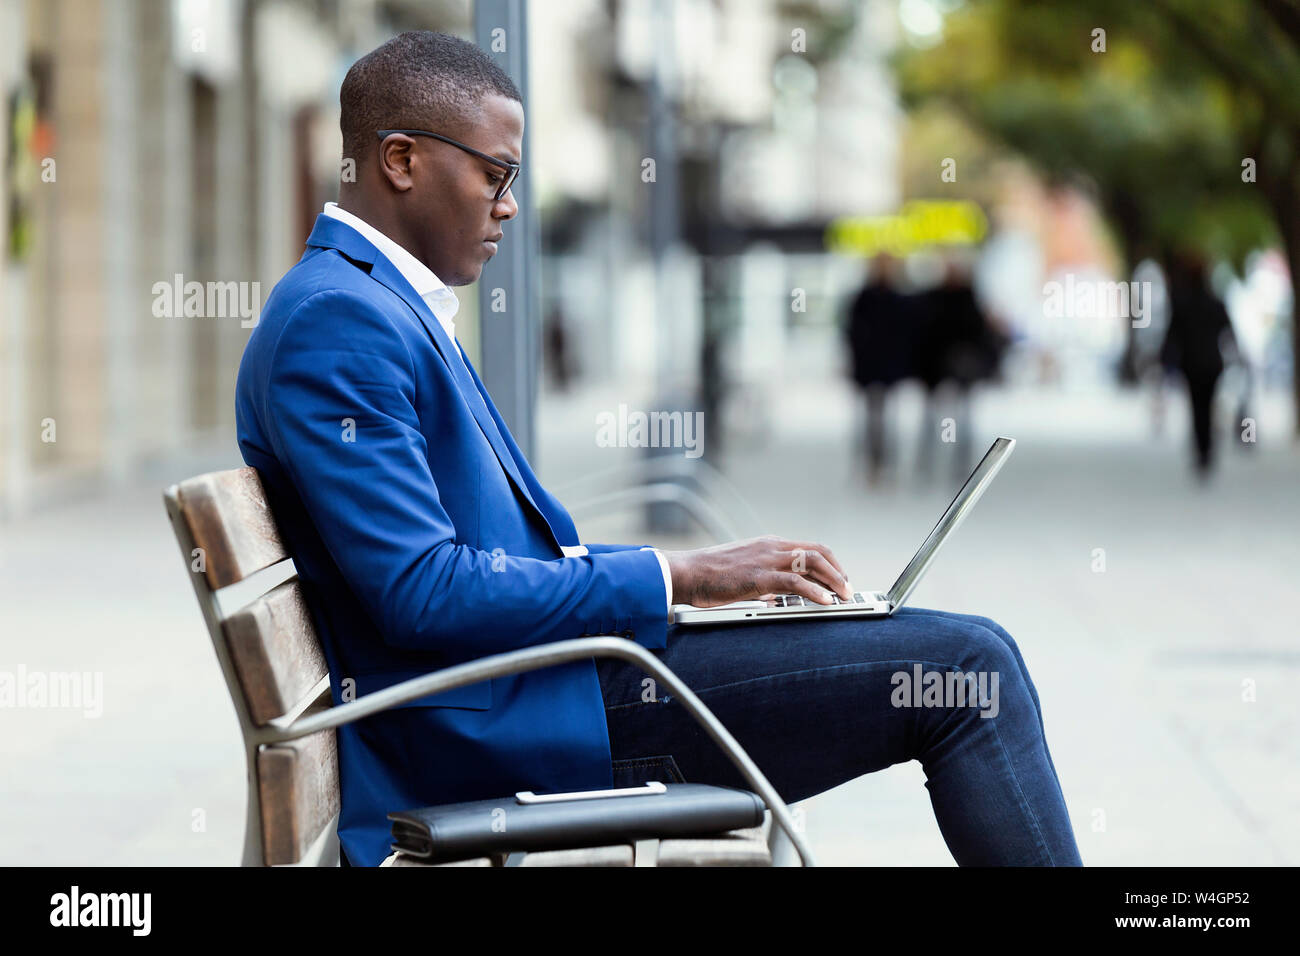 Young businessman wearing blue suit jacket sitting on bench and using laptop Stock Photo